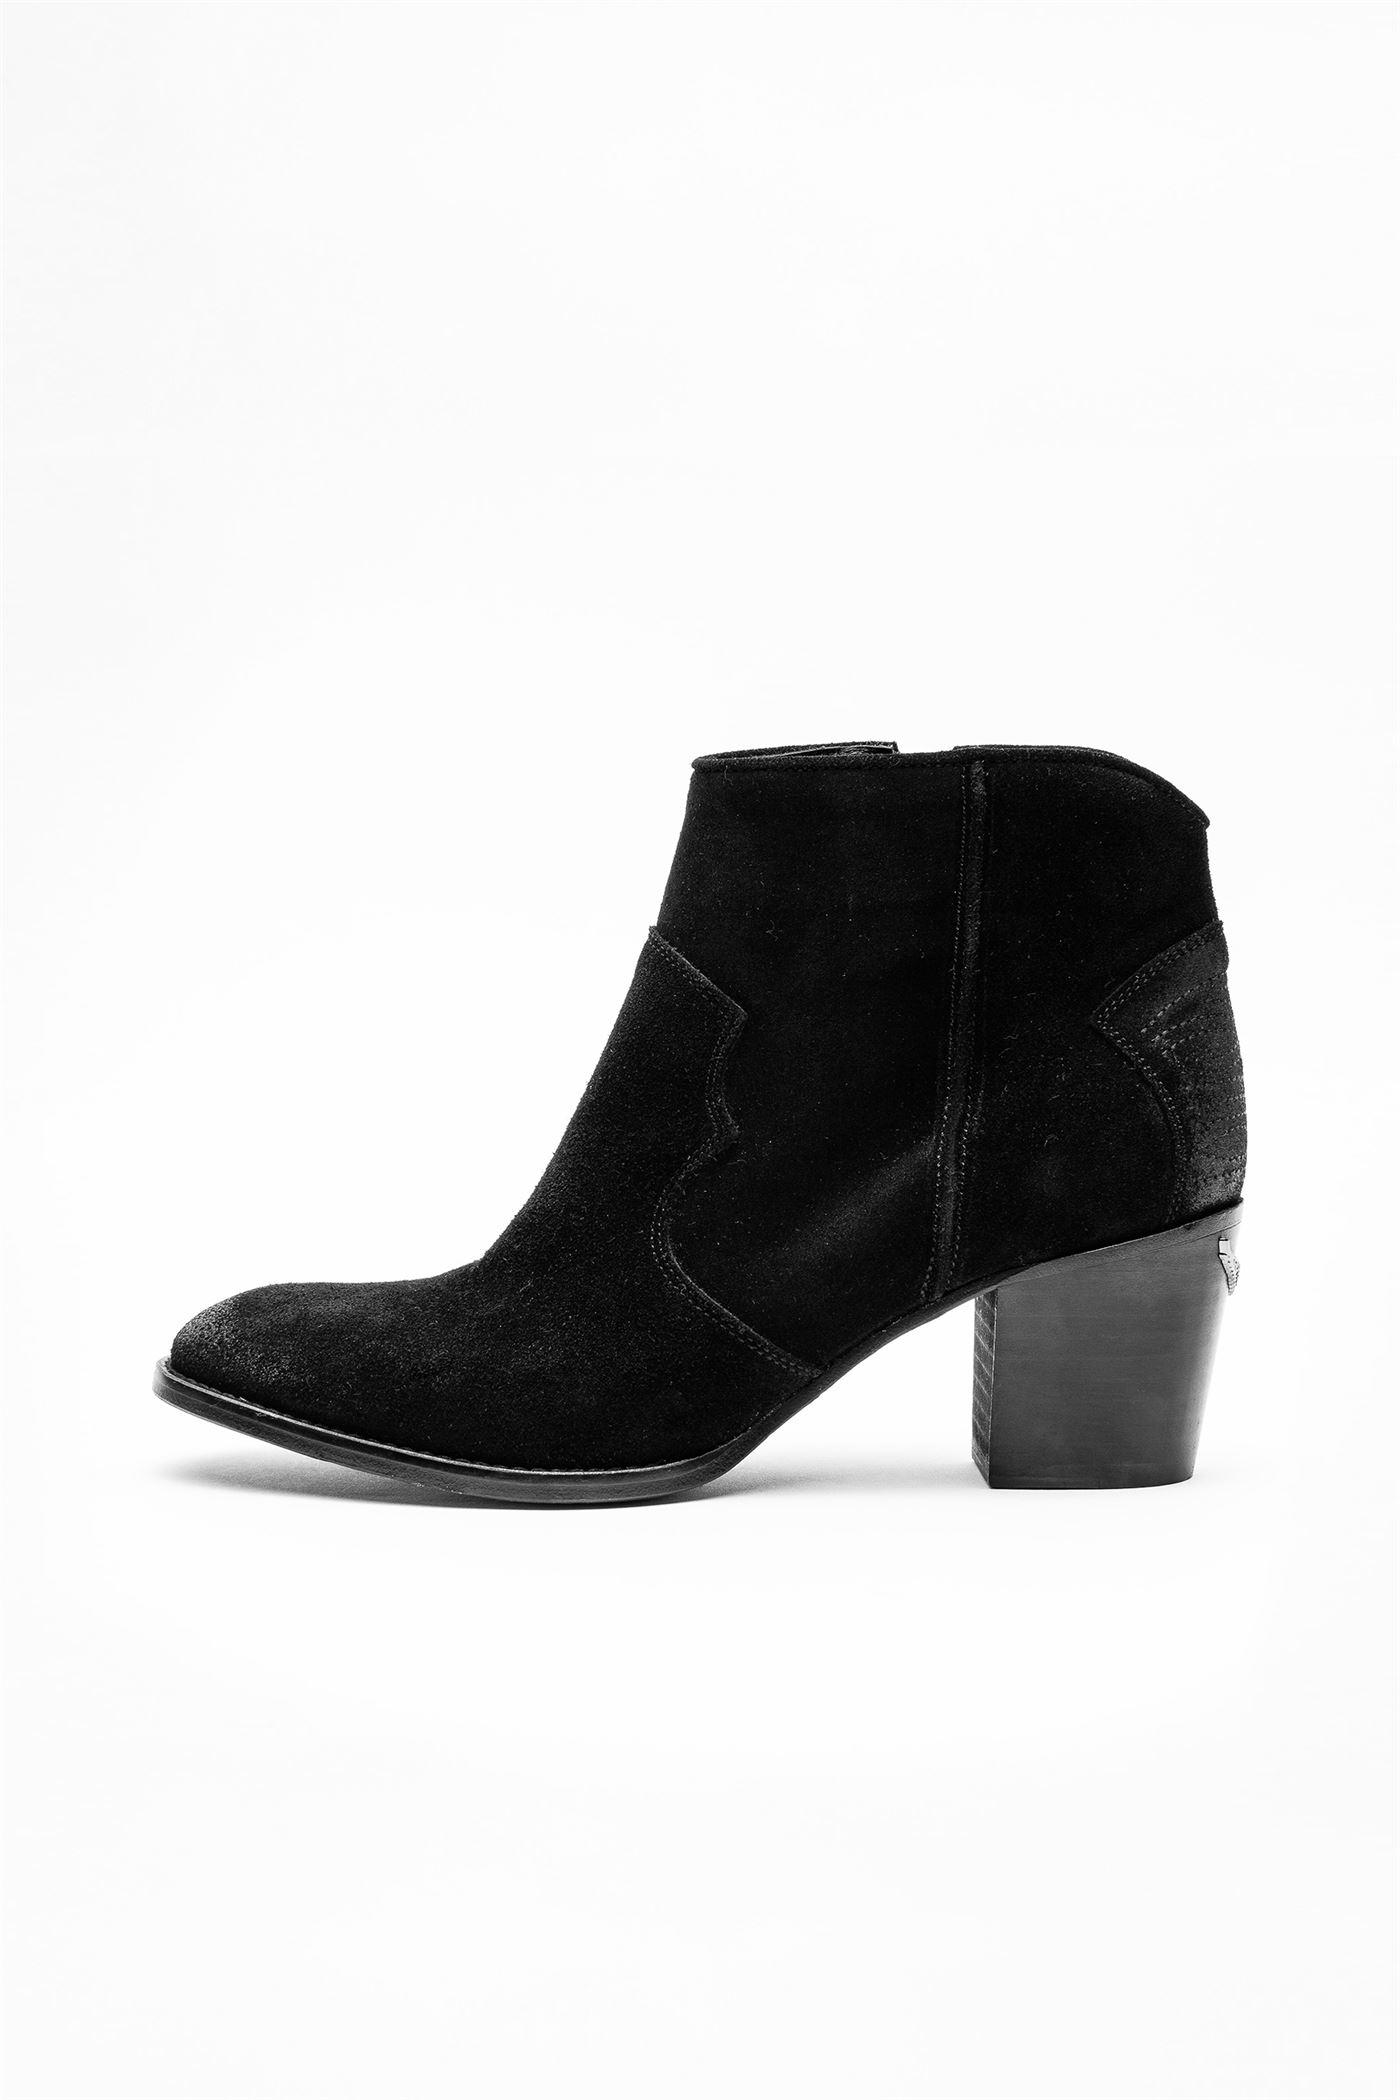 Zadig & Voltaire Molly Suede Boots in Black - Lyst